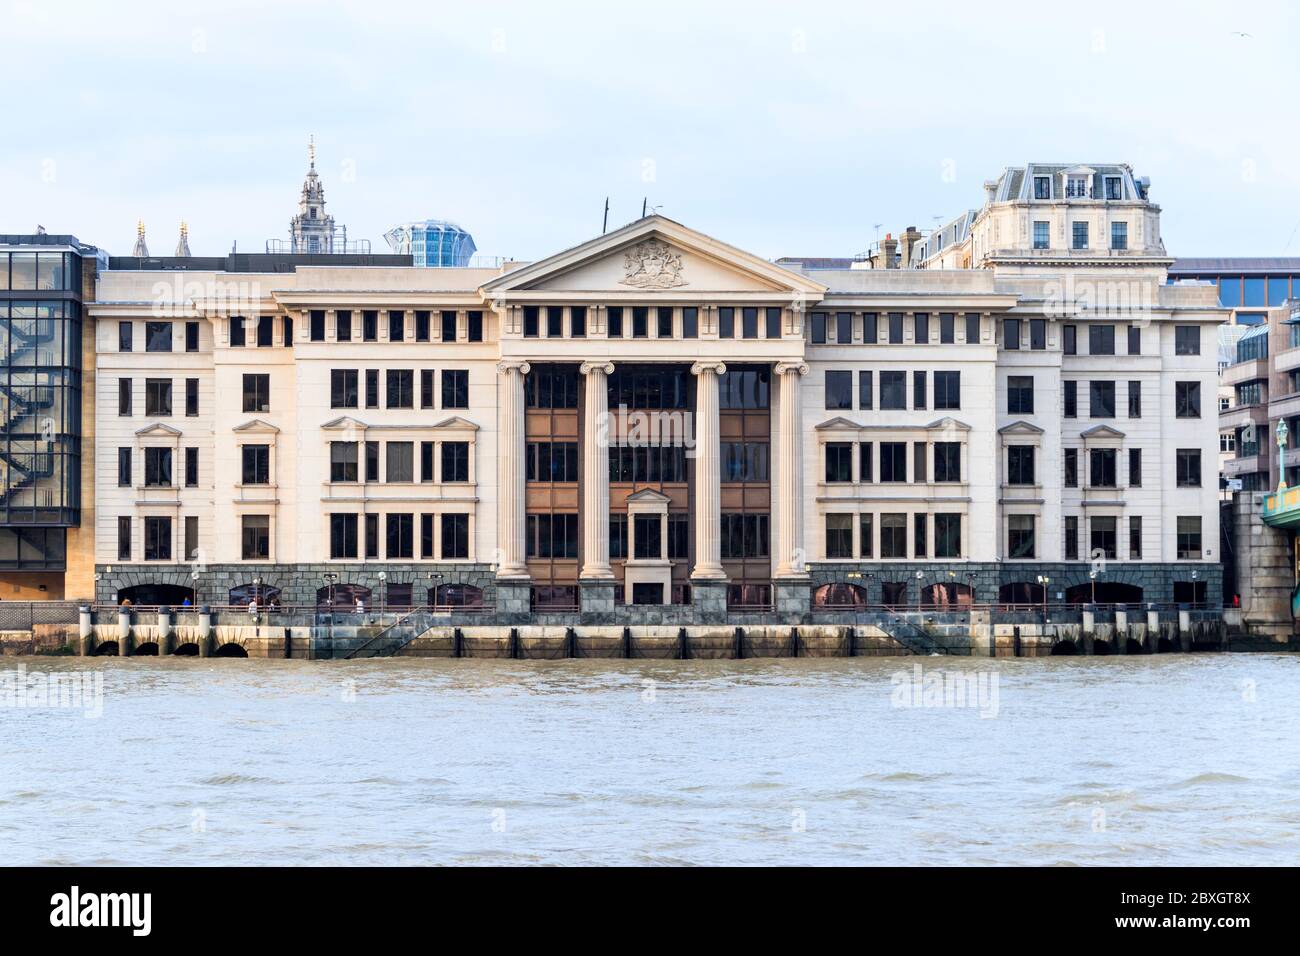 The classical granite and limestone riverside facade of Vintners Place in  Upper Thames Street, from across the River Thames, Southwark, London, UK Stock Photo